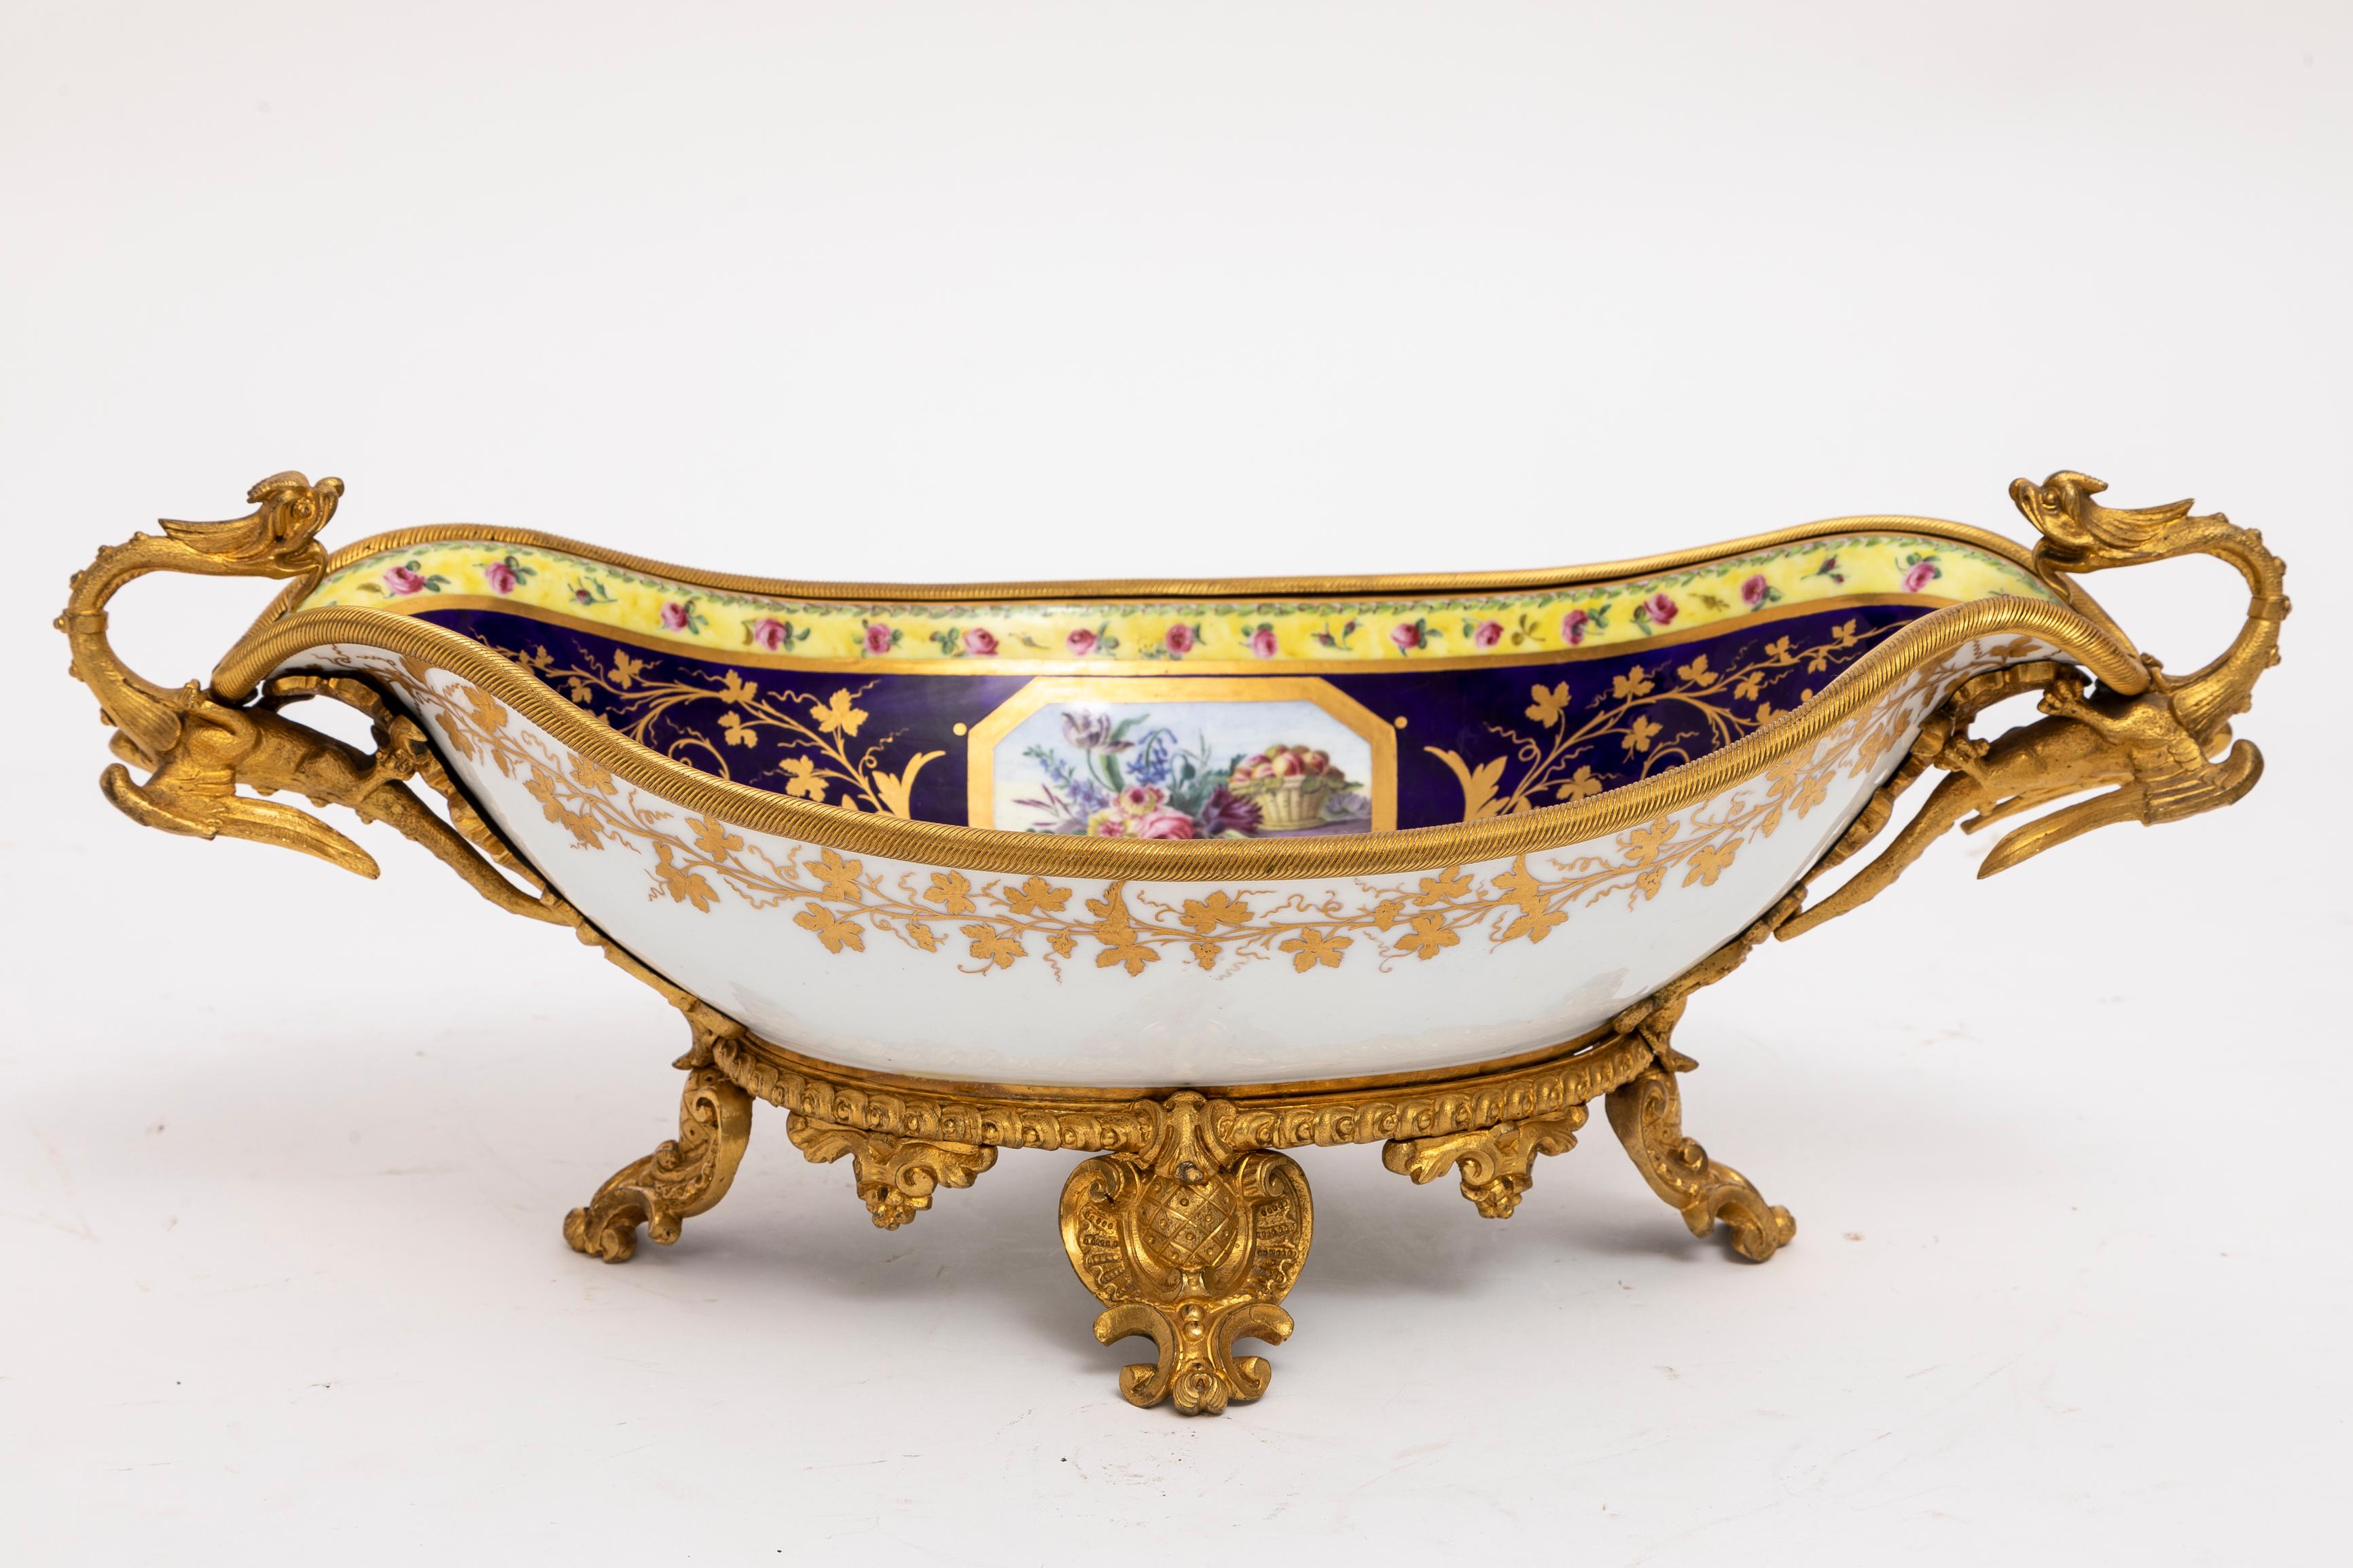 Louis XVI An 18th C. French Ormolu Mounted Sevres Porcelain Centerpiece w/ Dragon Handles For Sale